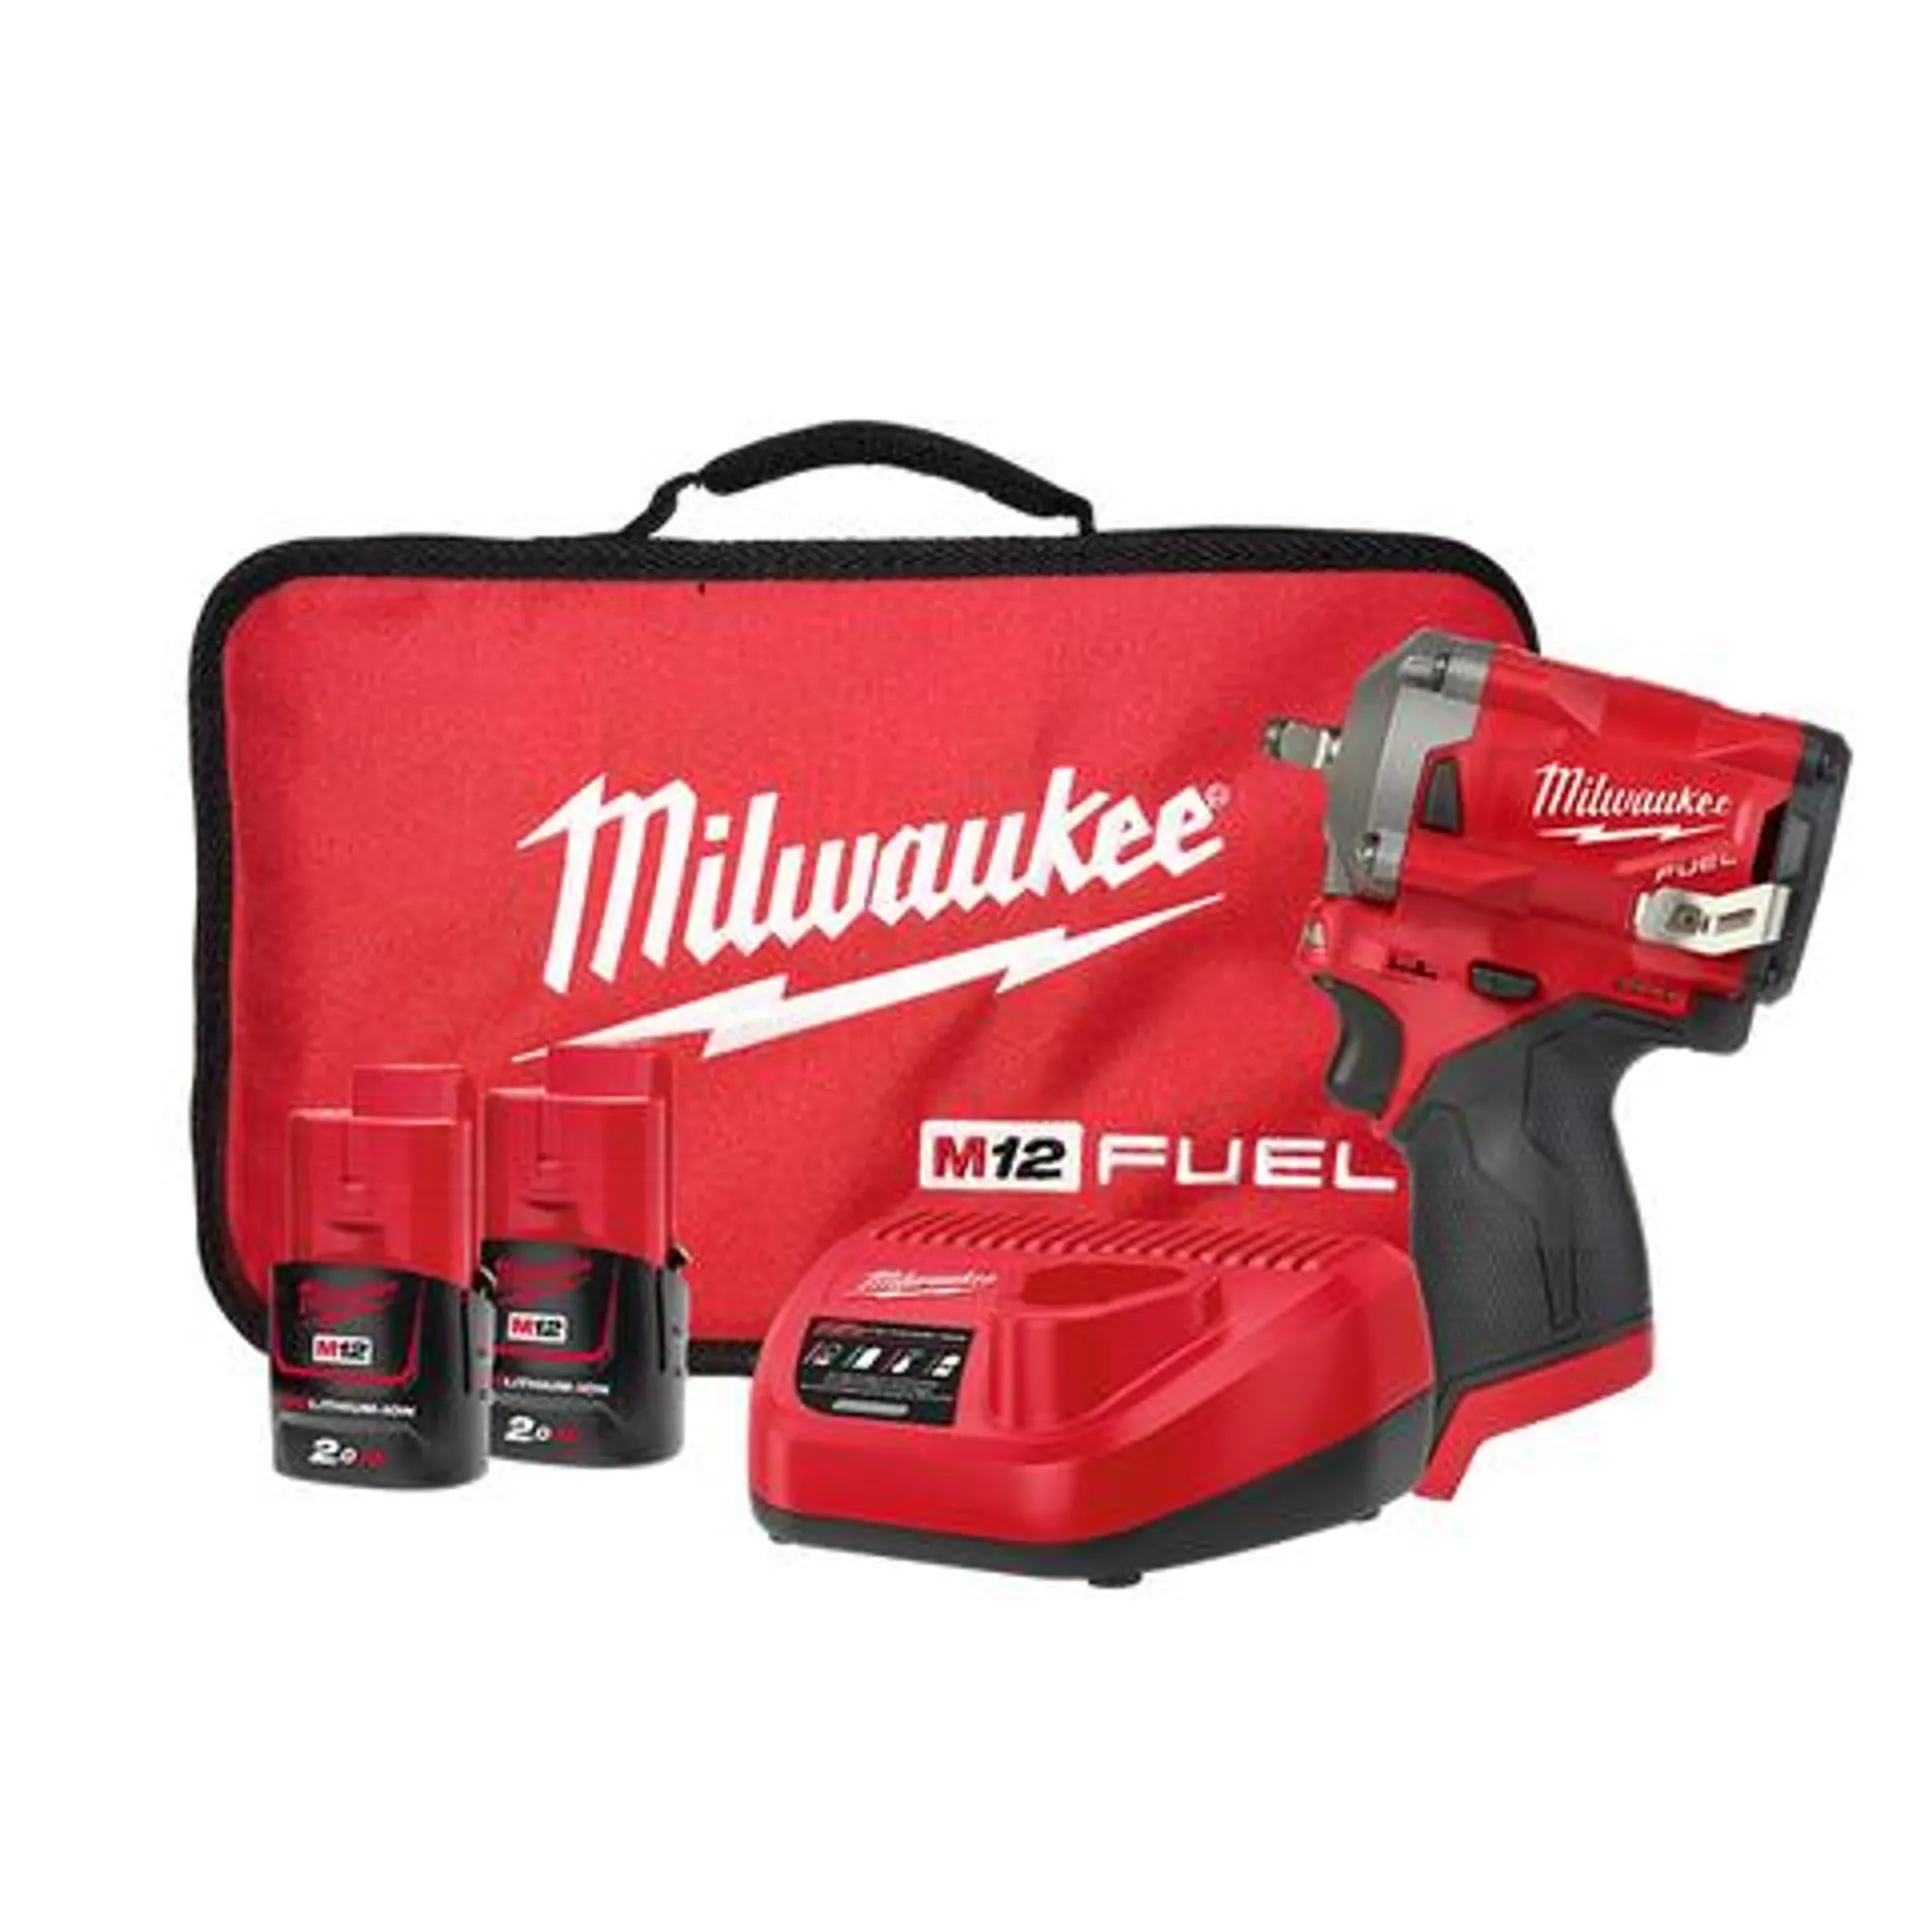 Milwaukee M12 FUEL Cordless Impact Wrench Stubby 3/8in 12v 2Ah